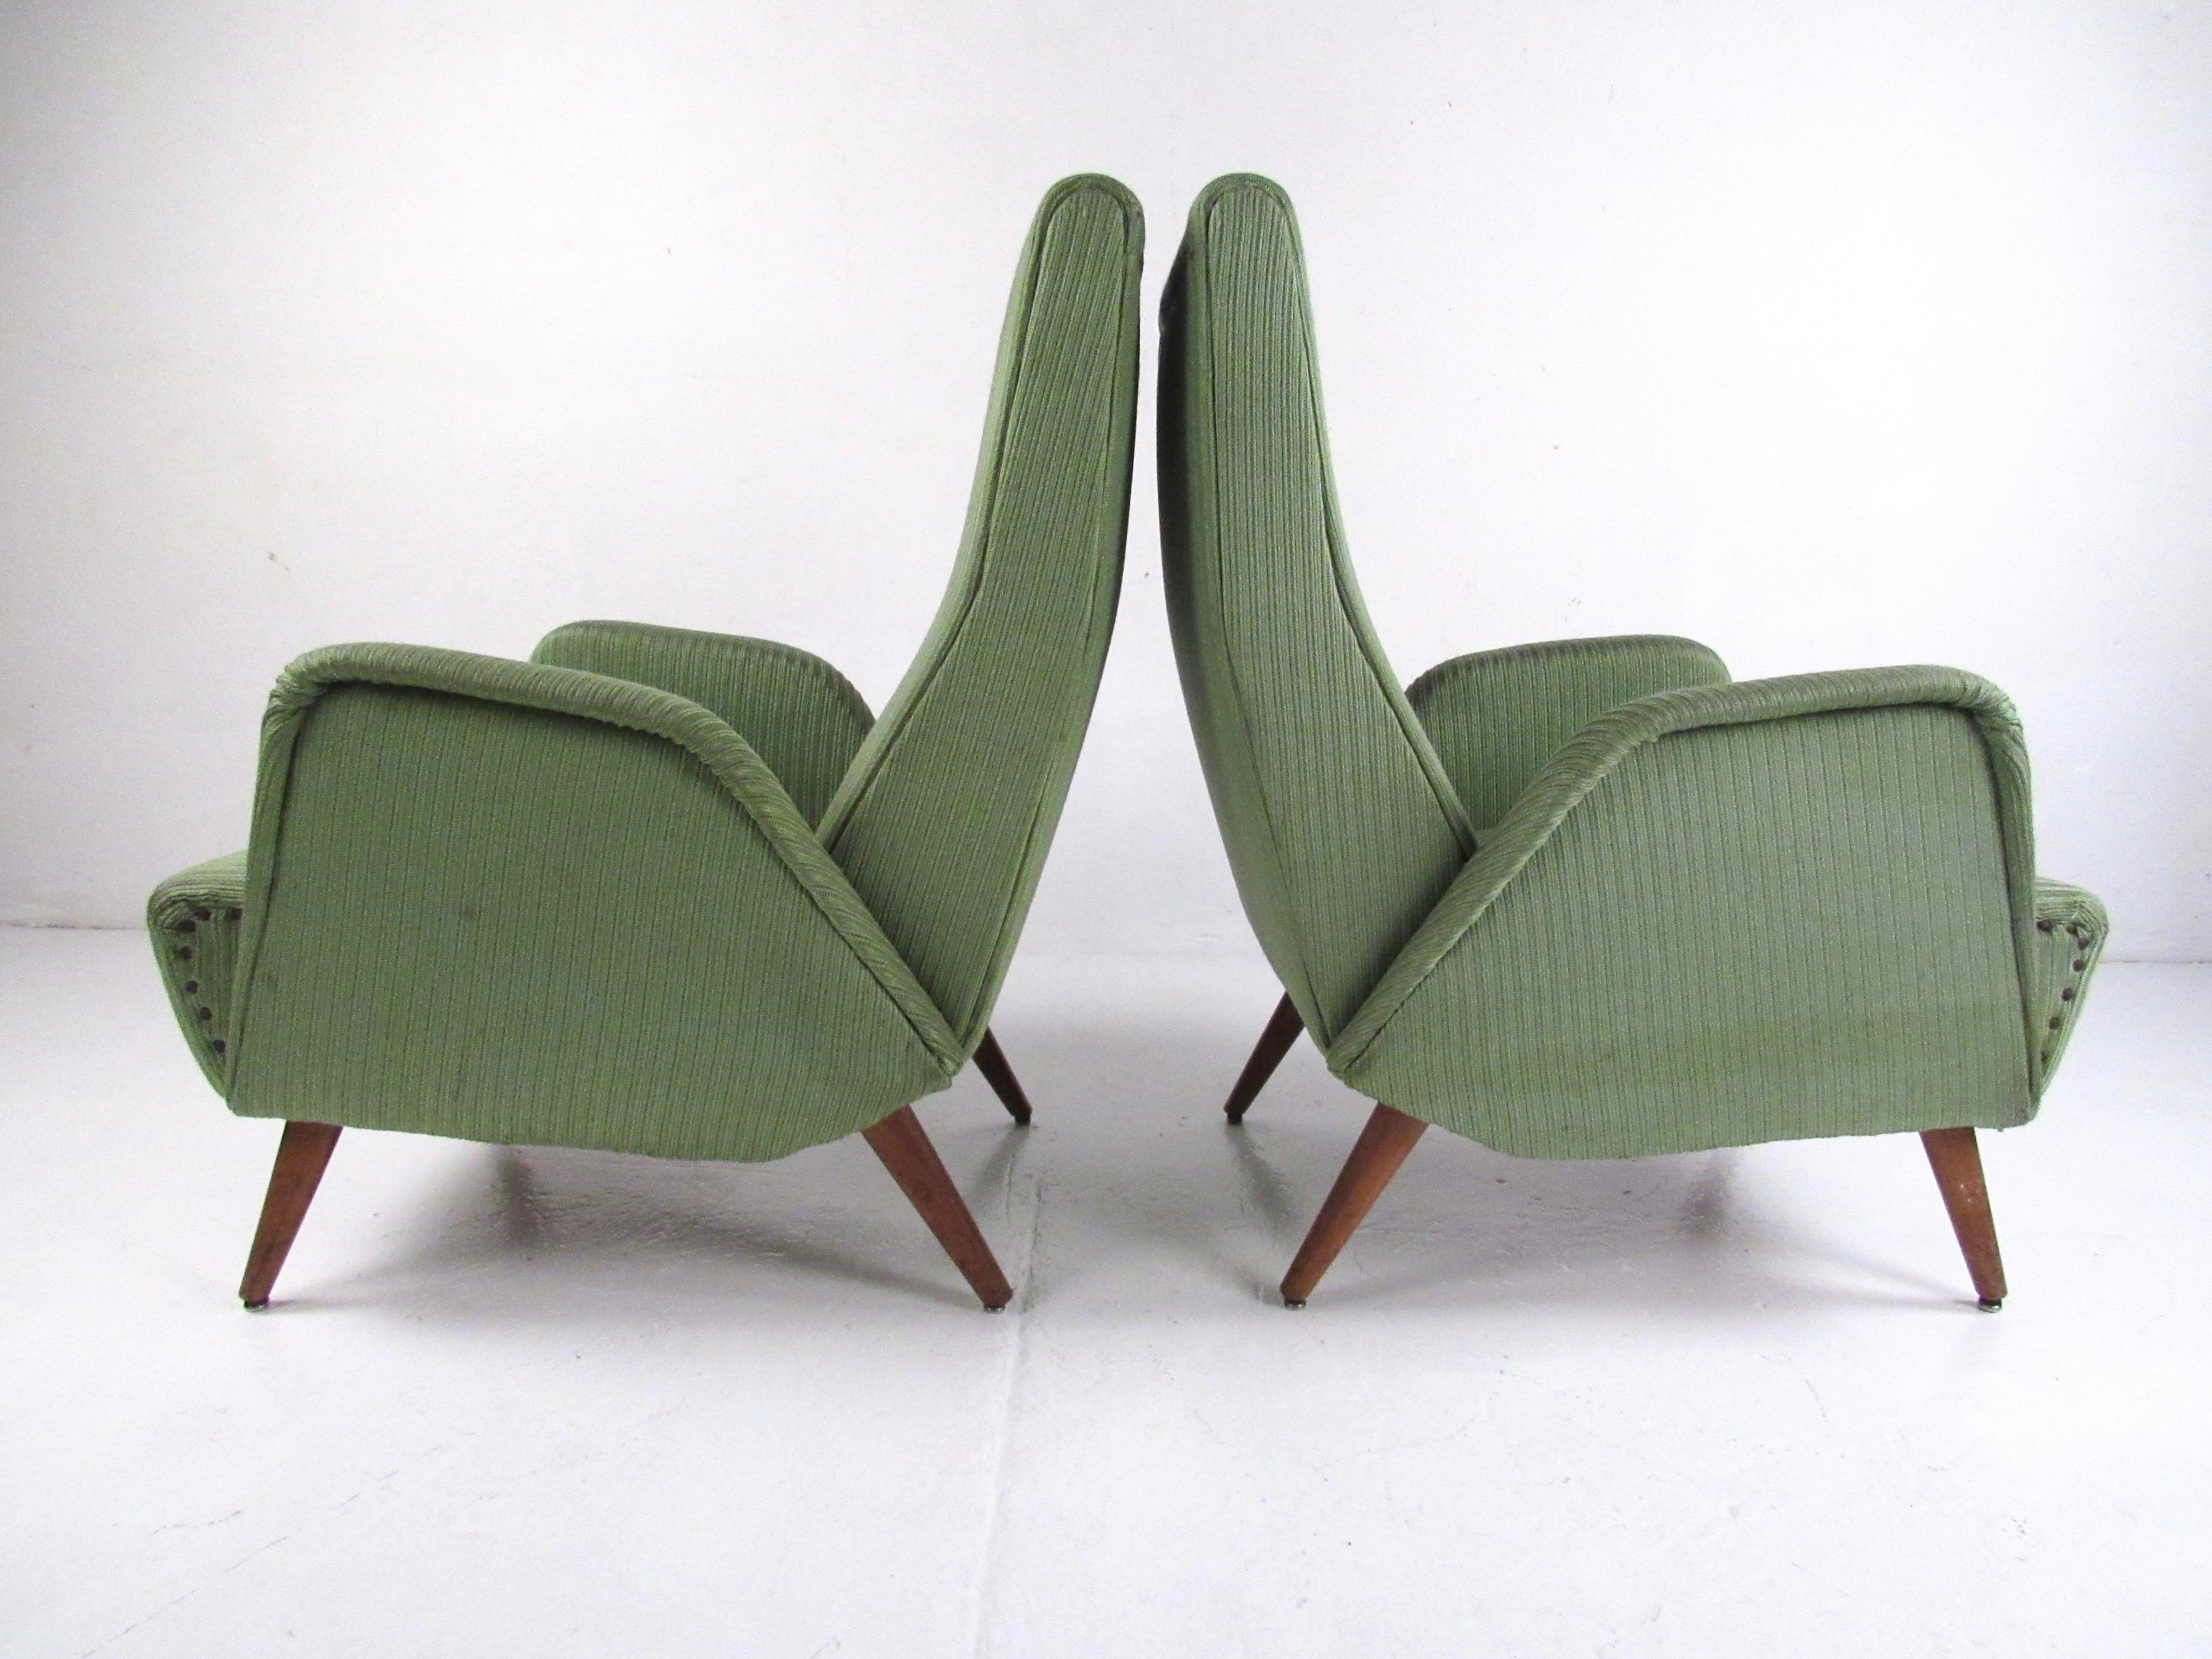 Mid-20th Century Pair of Italian Moderne Lounge Chairs after Marco Zanuso